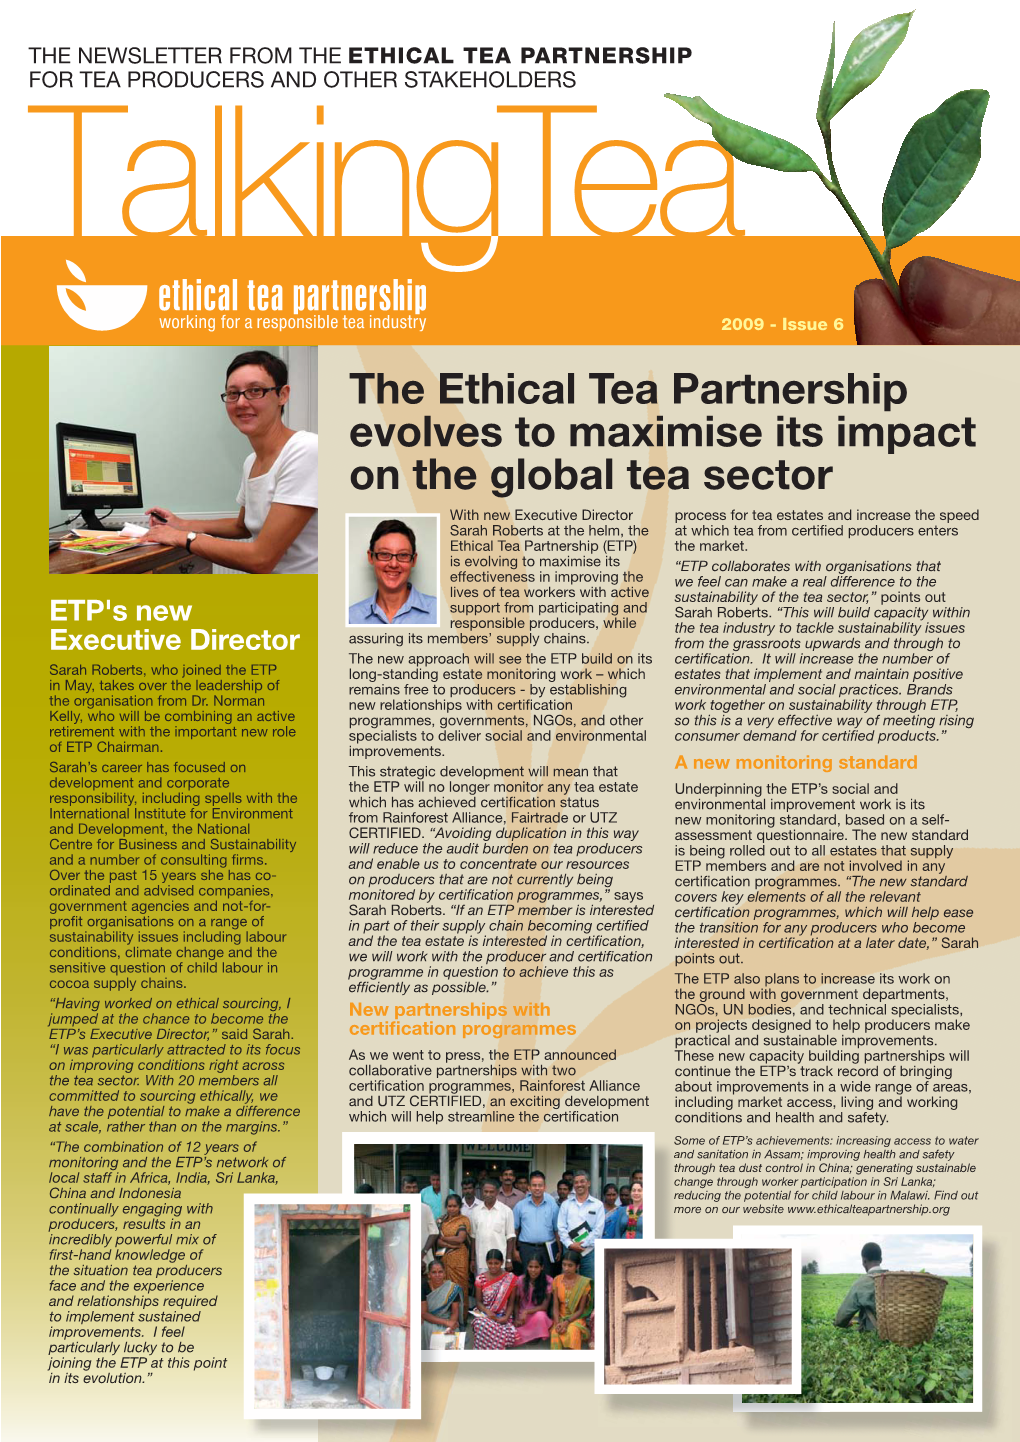 The Ethical Tea Partnership Evolves to Maximise Its Impact on the Global